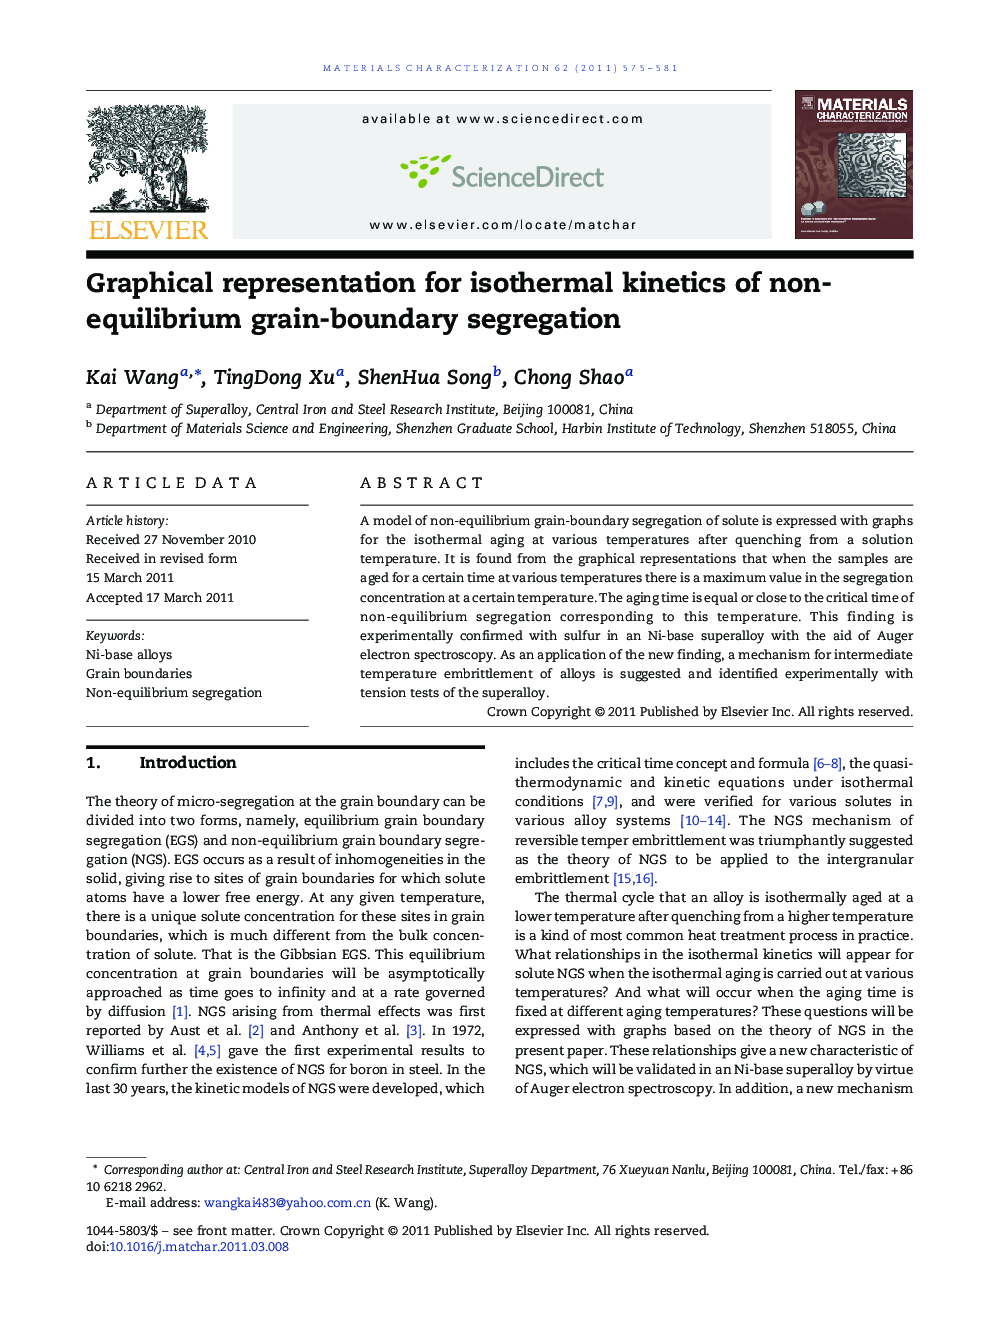 Graphical representation for isothermal kinetics of non-equilibrium grain-boundary segregation